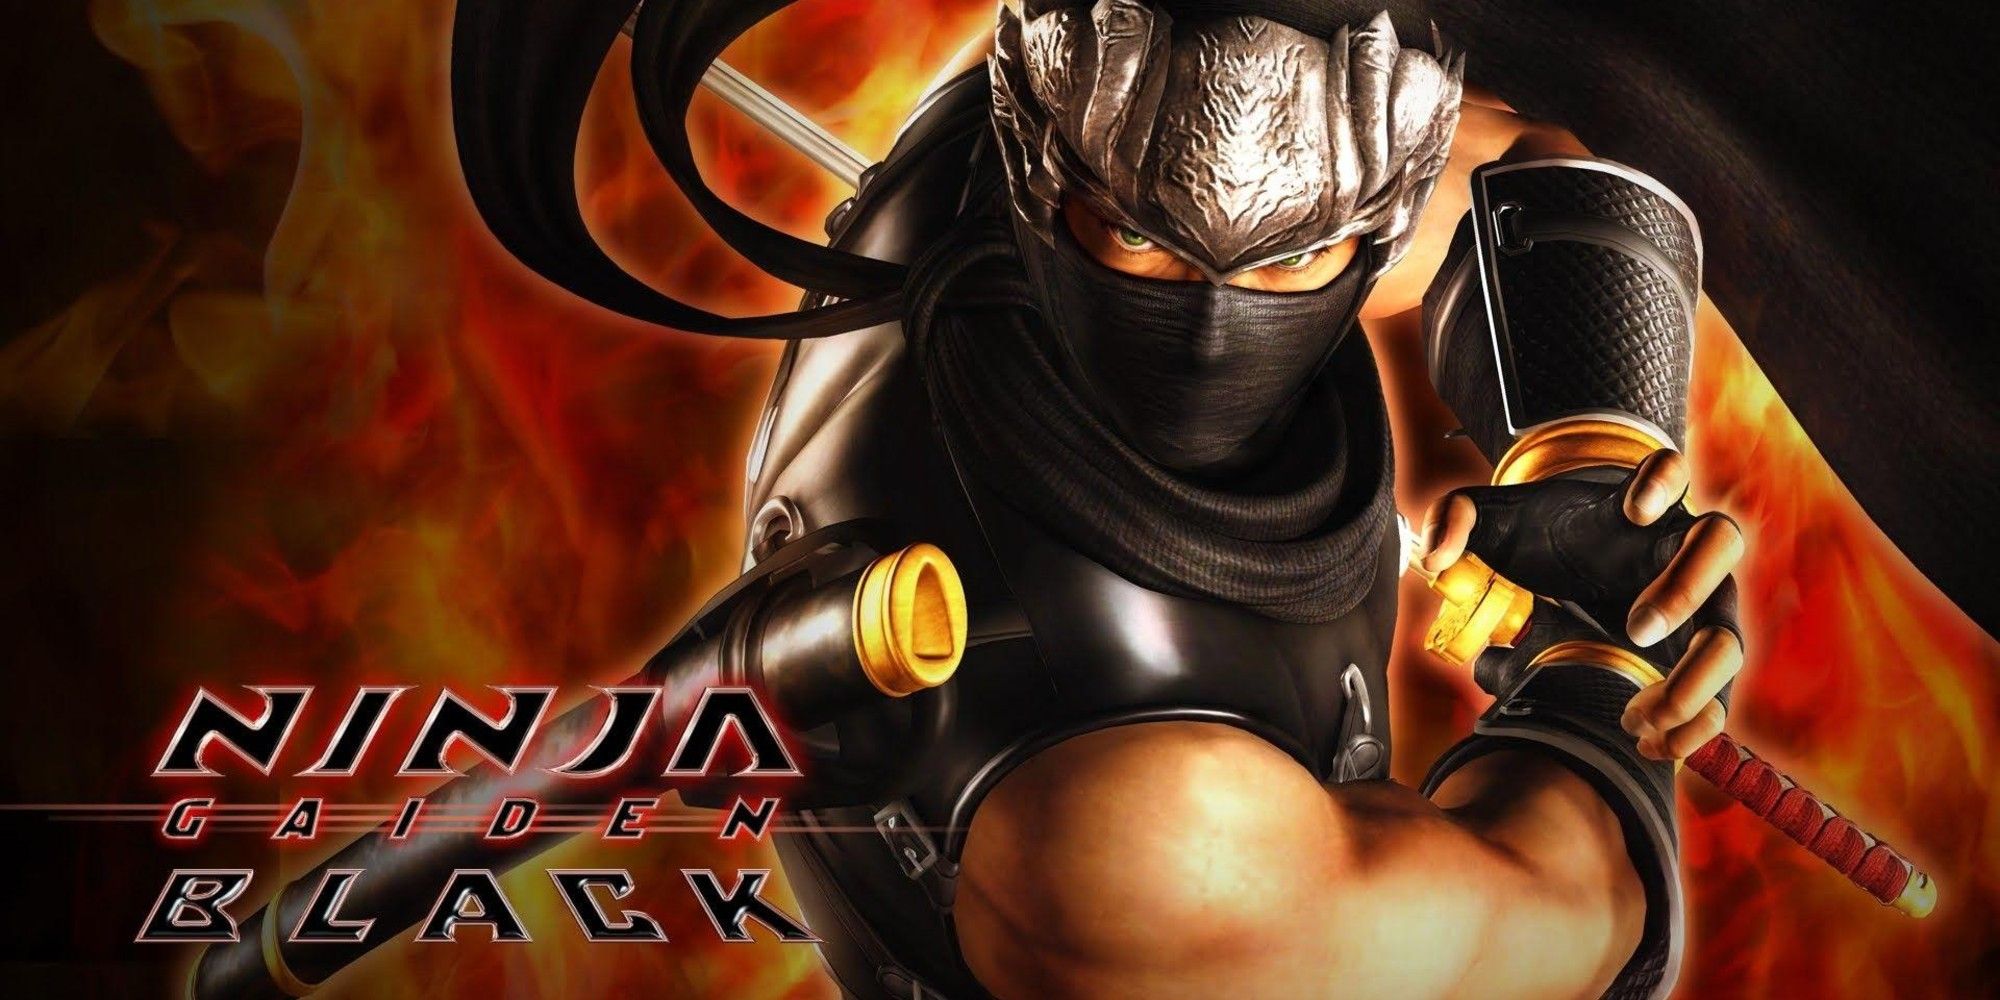 How Ninja Gaiden Blacks Lost Source Code Will Affect The Master Collection